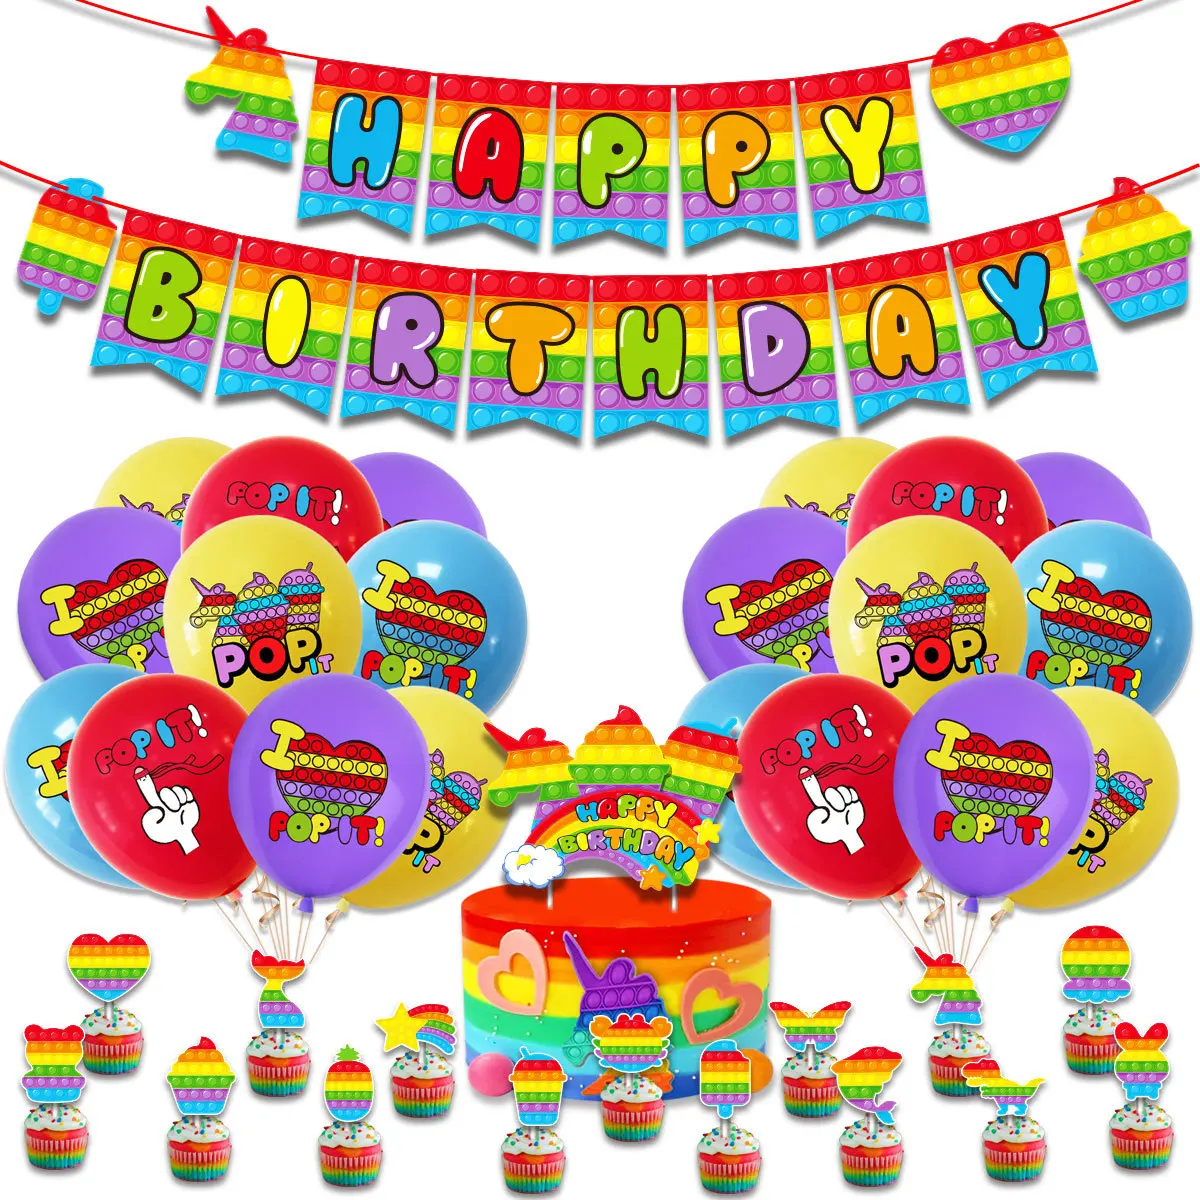 

Rodent Killing Pioneer Theme Kid Birthday Party Decoration Set Fidget Balloon Banner Cake Card Baby Shower Layout Air Globos Toy